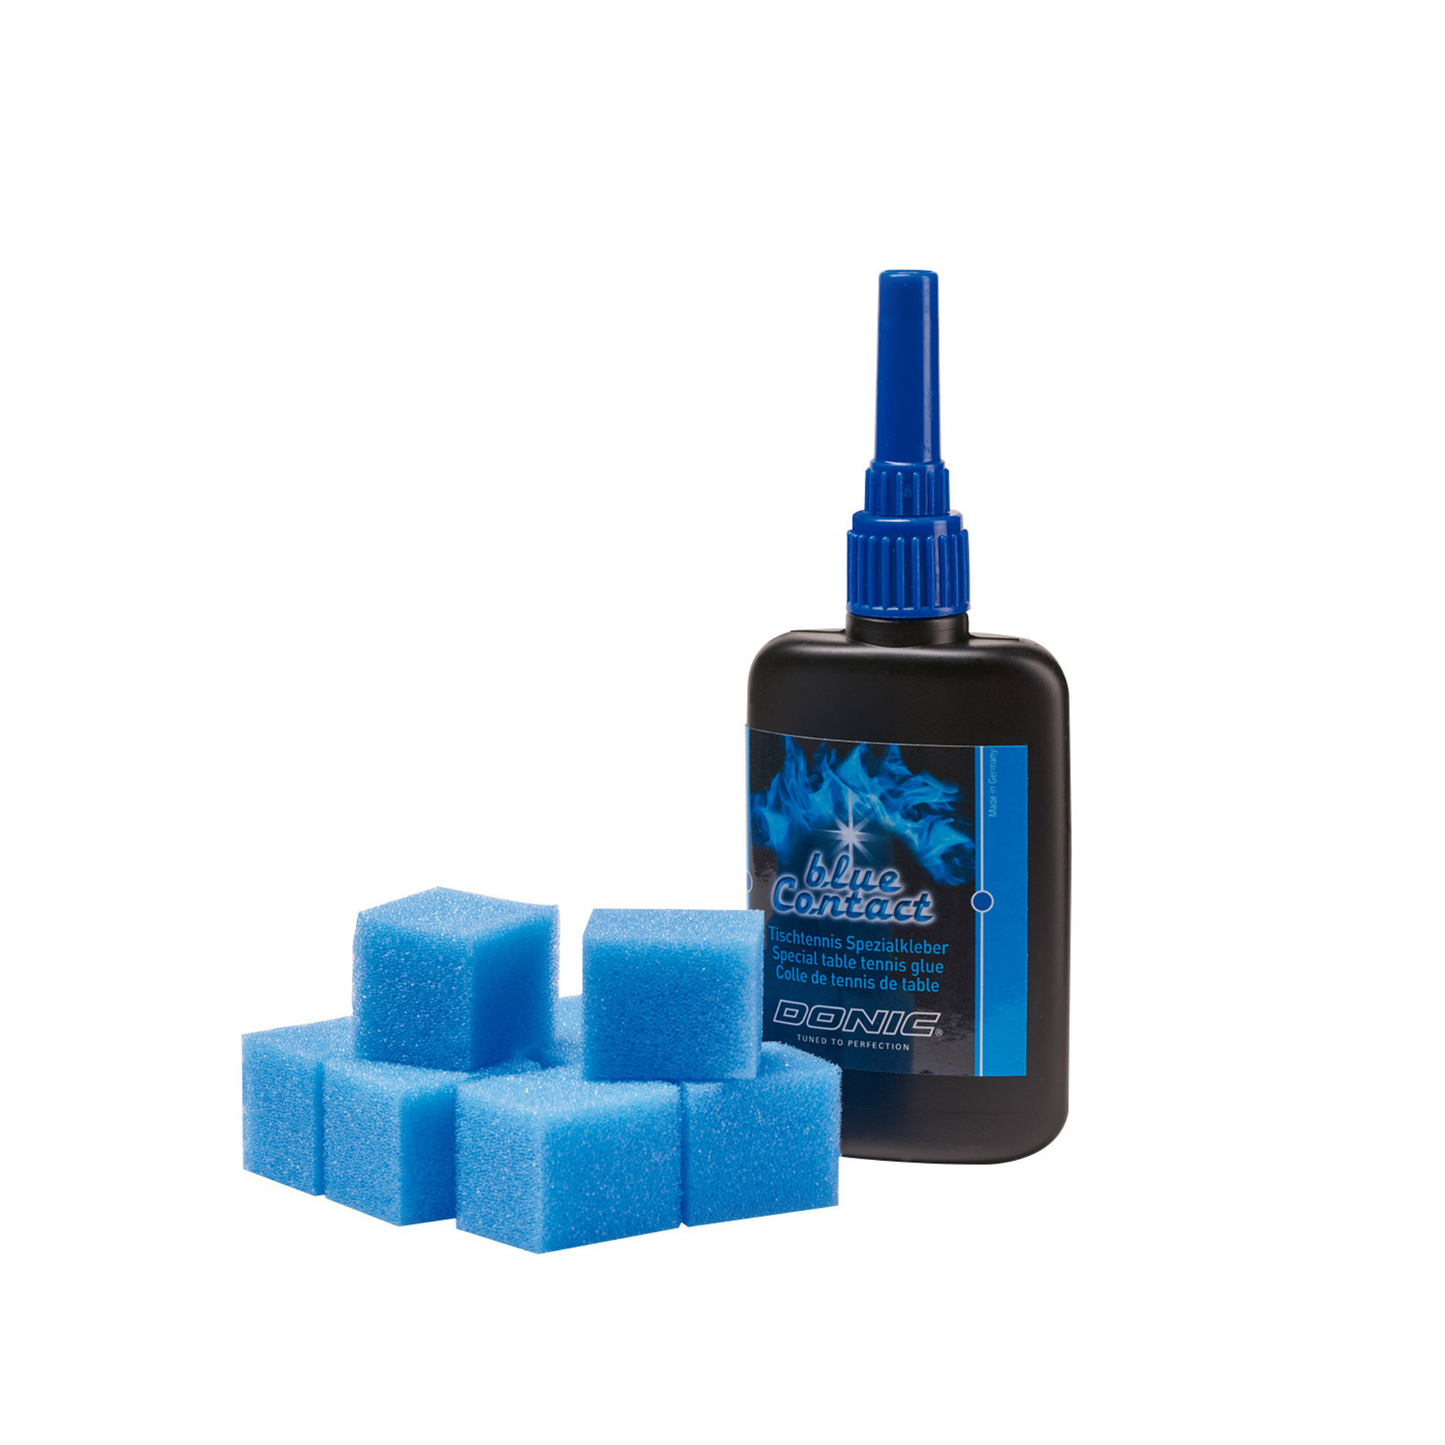 Donic Blue Contact Glue